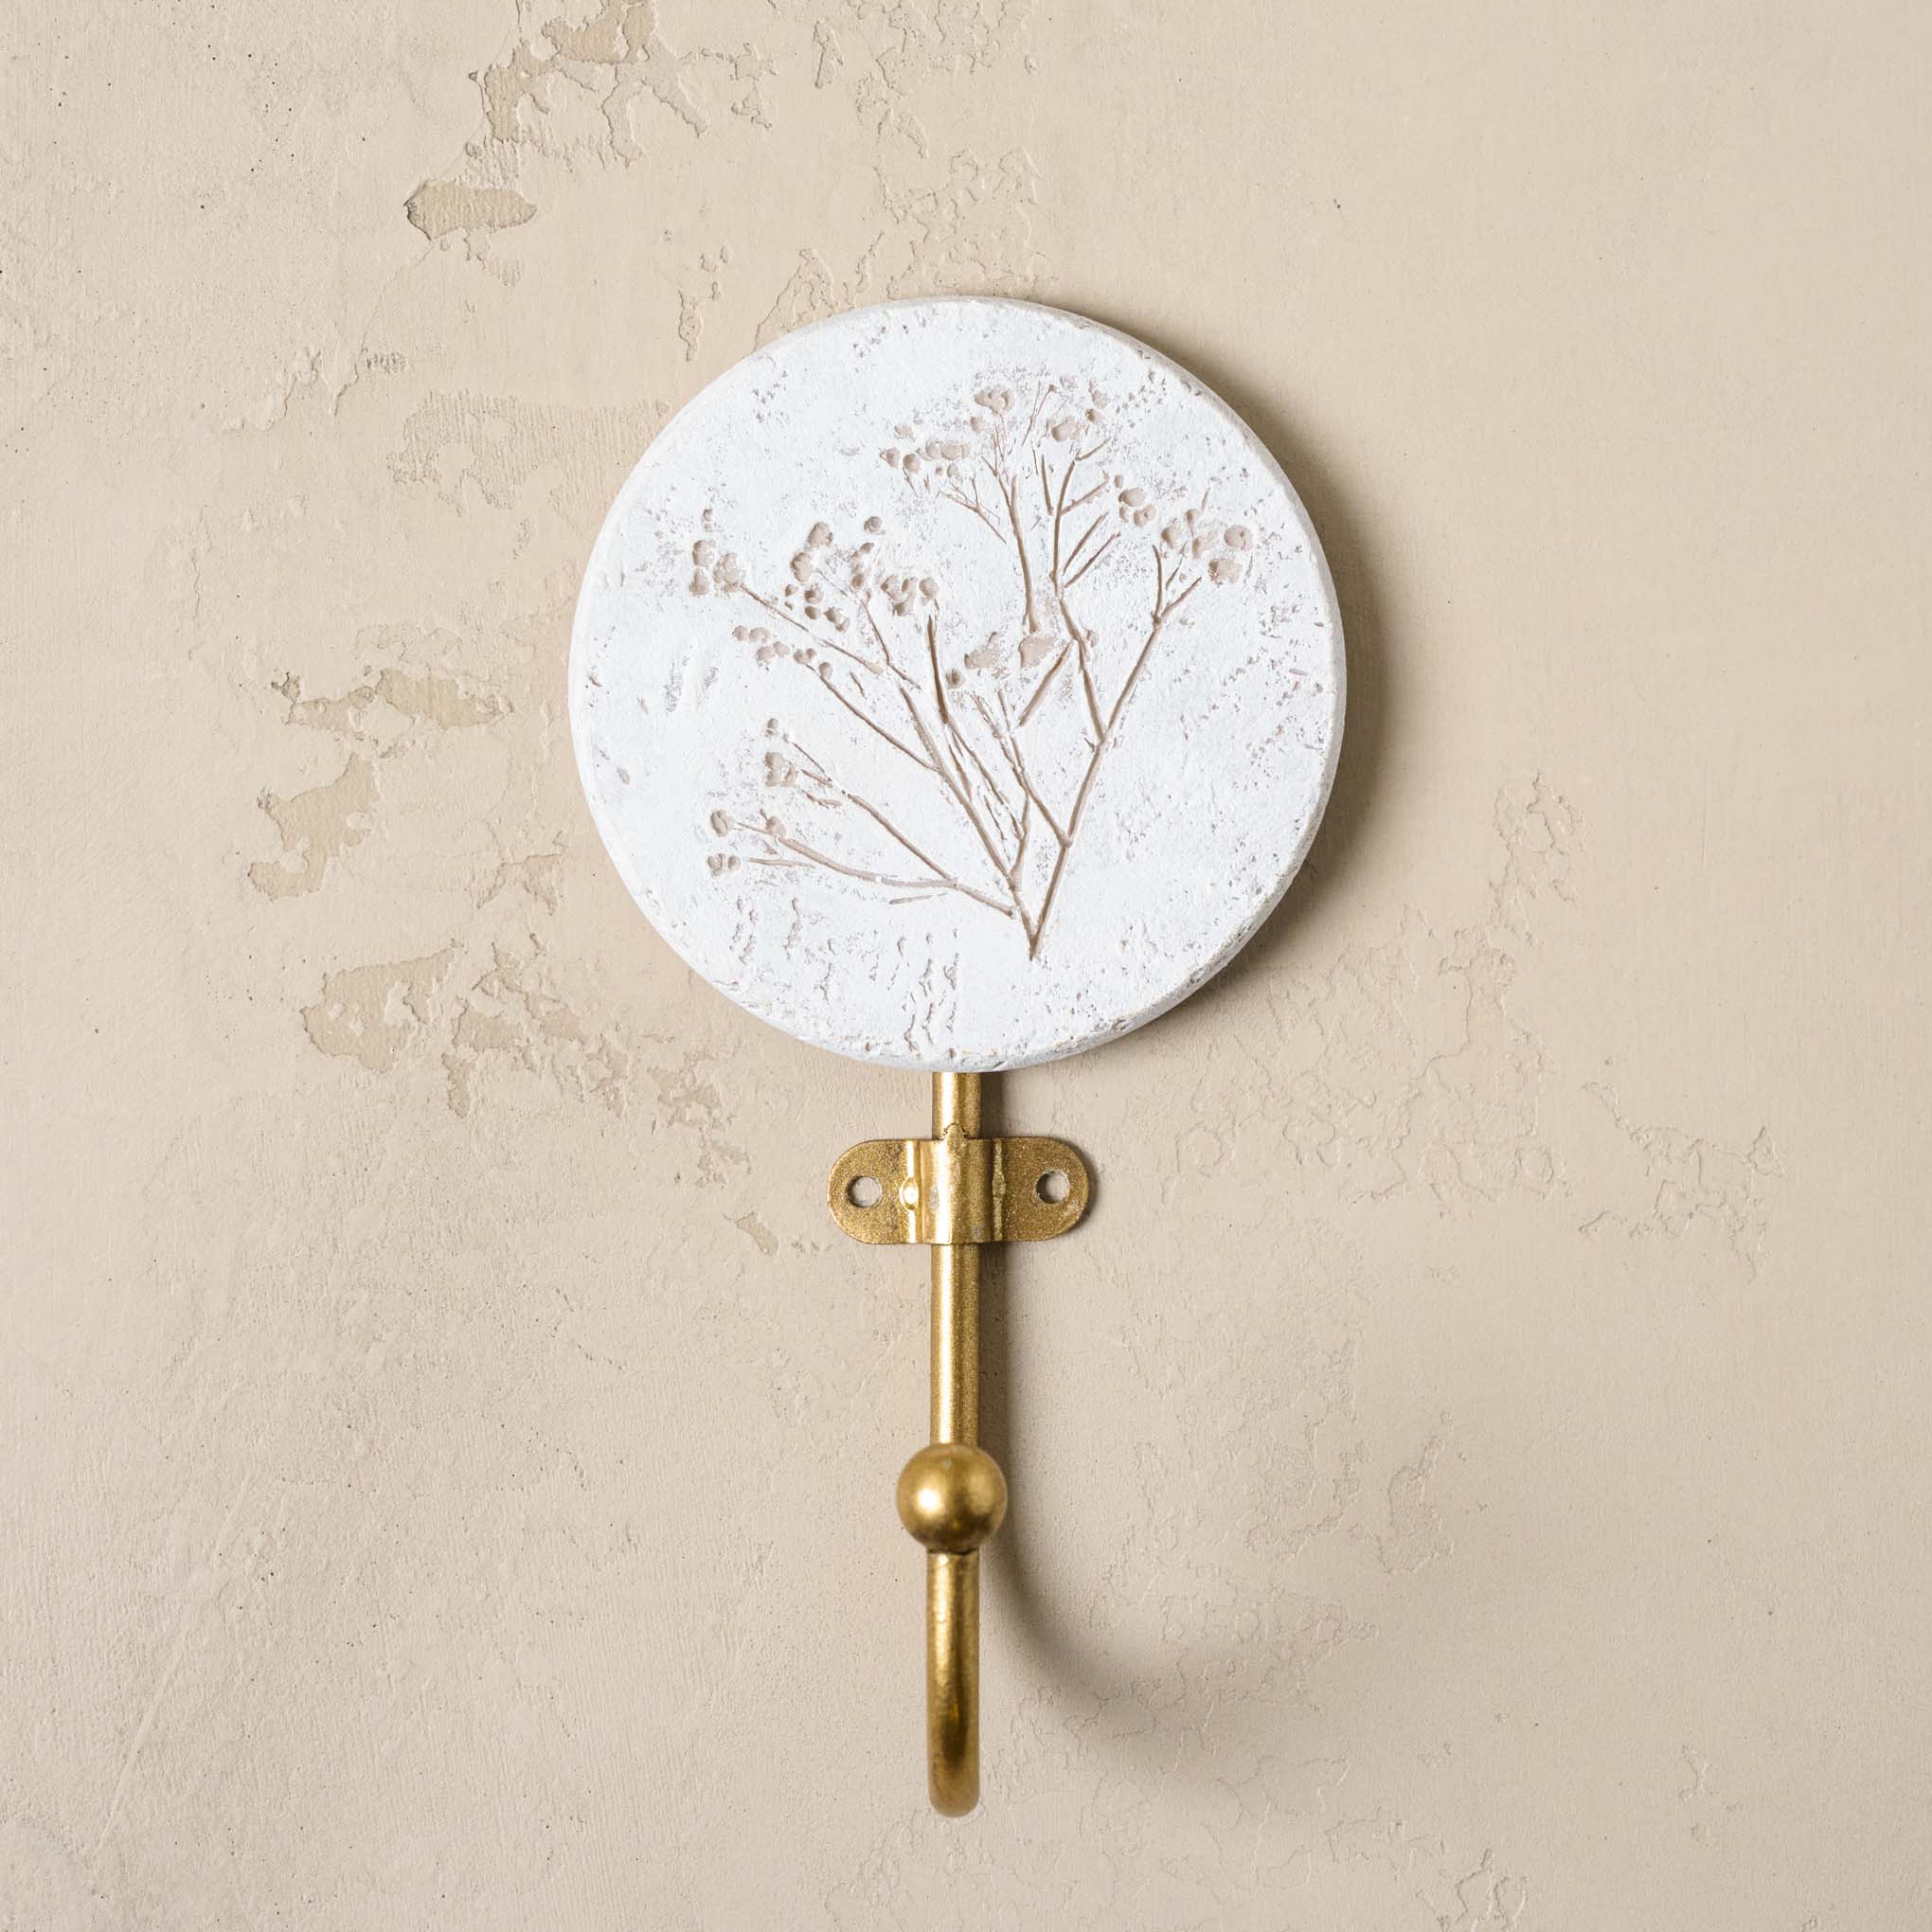 Pressed Flower Plaque Wall Hook $10.00